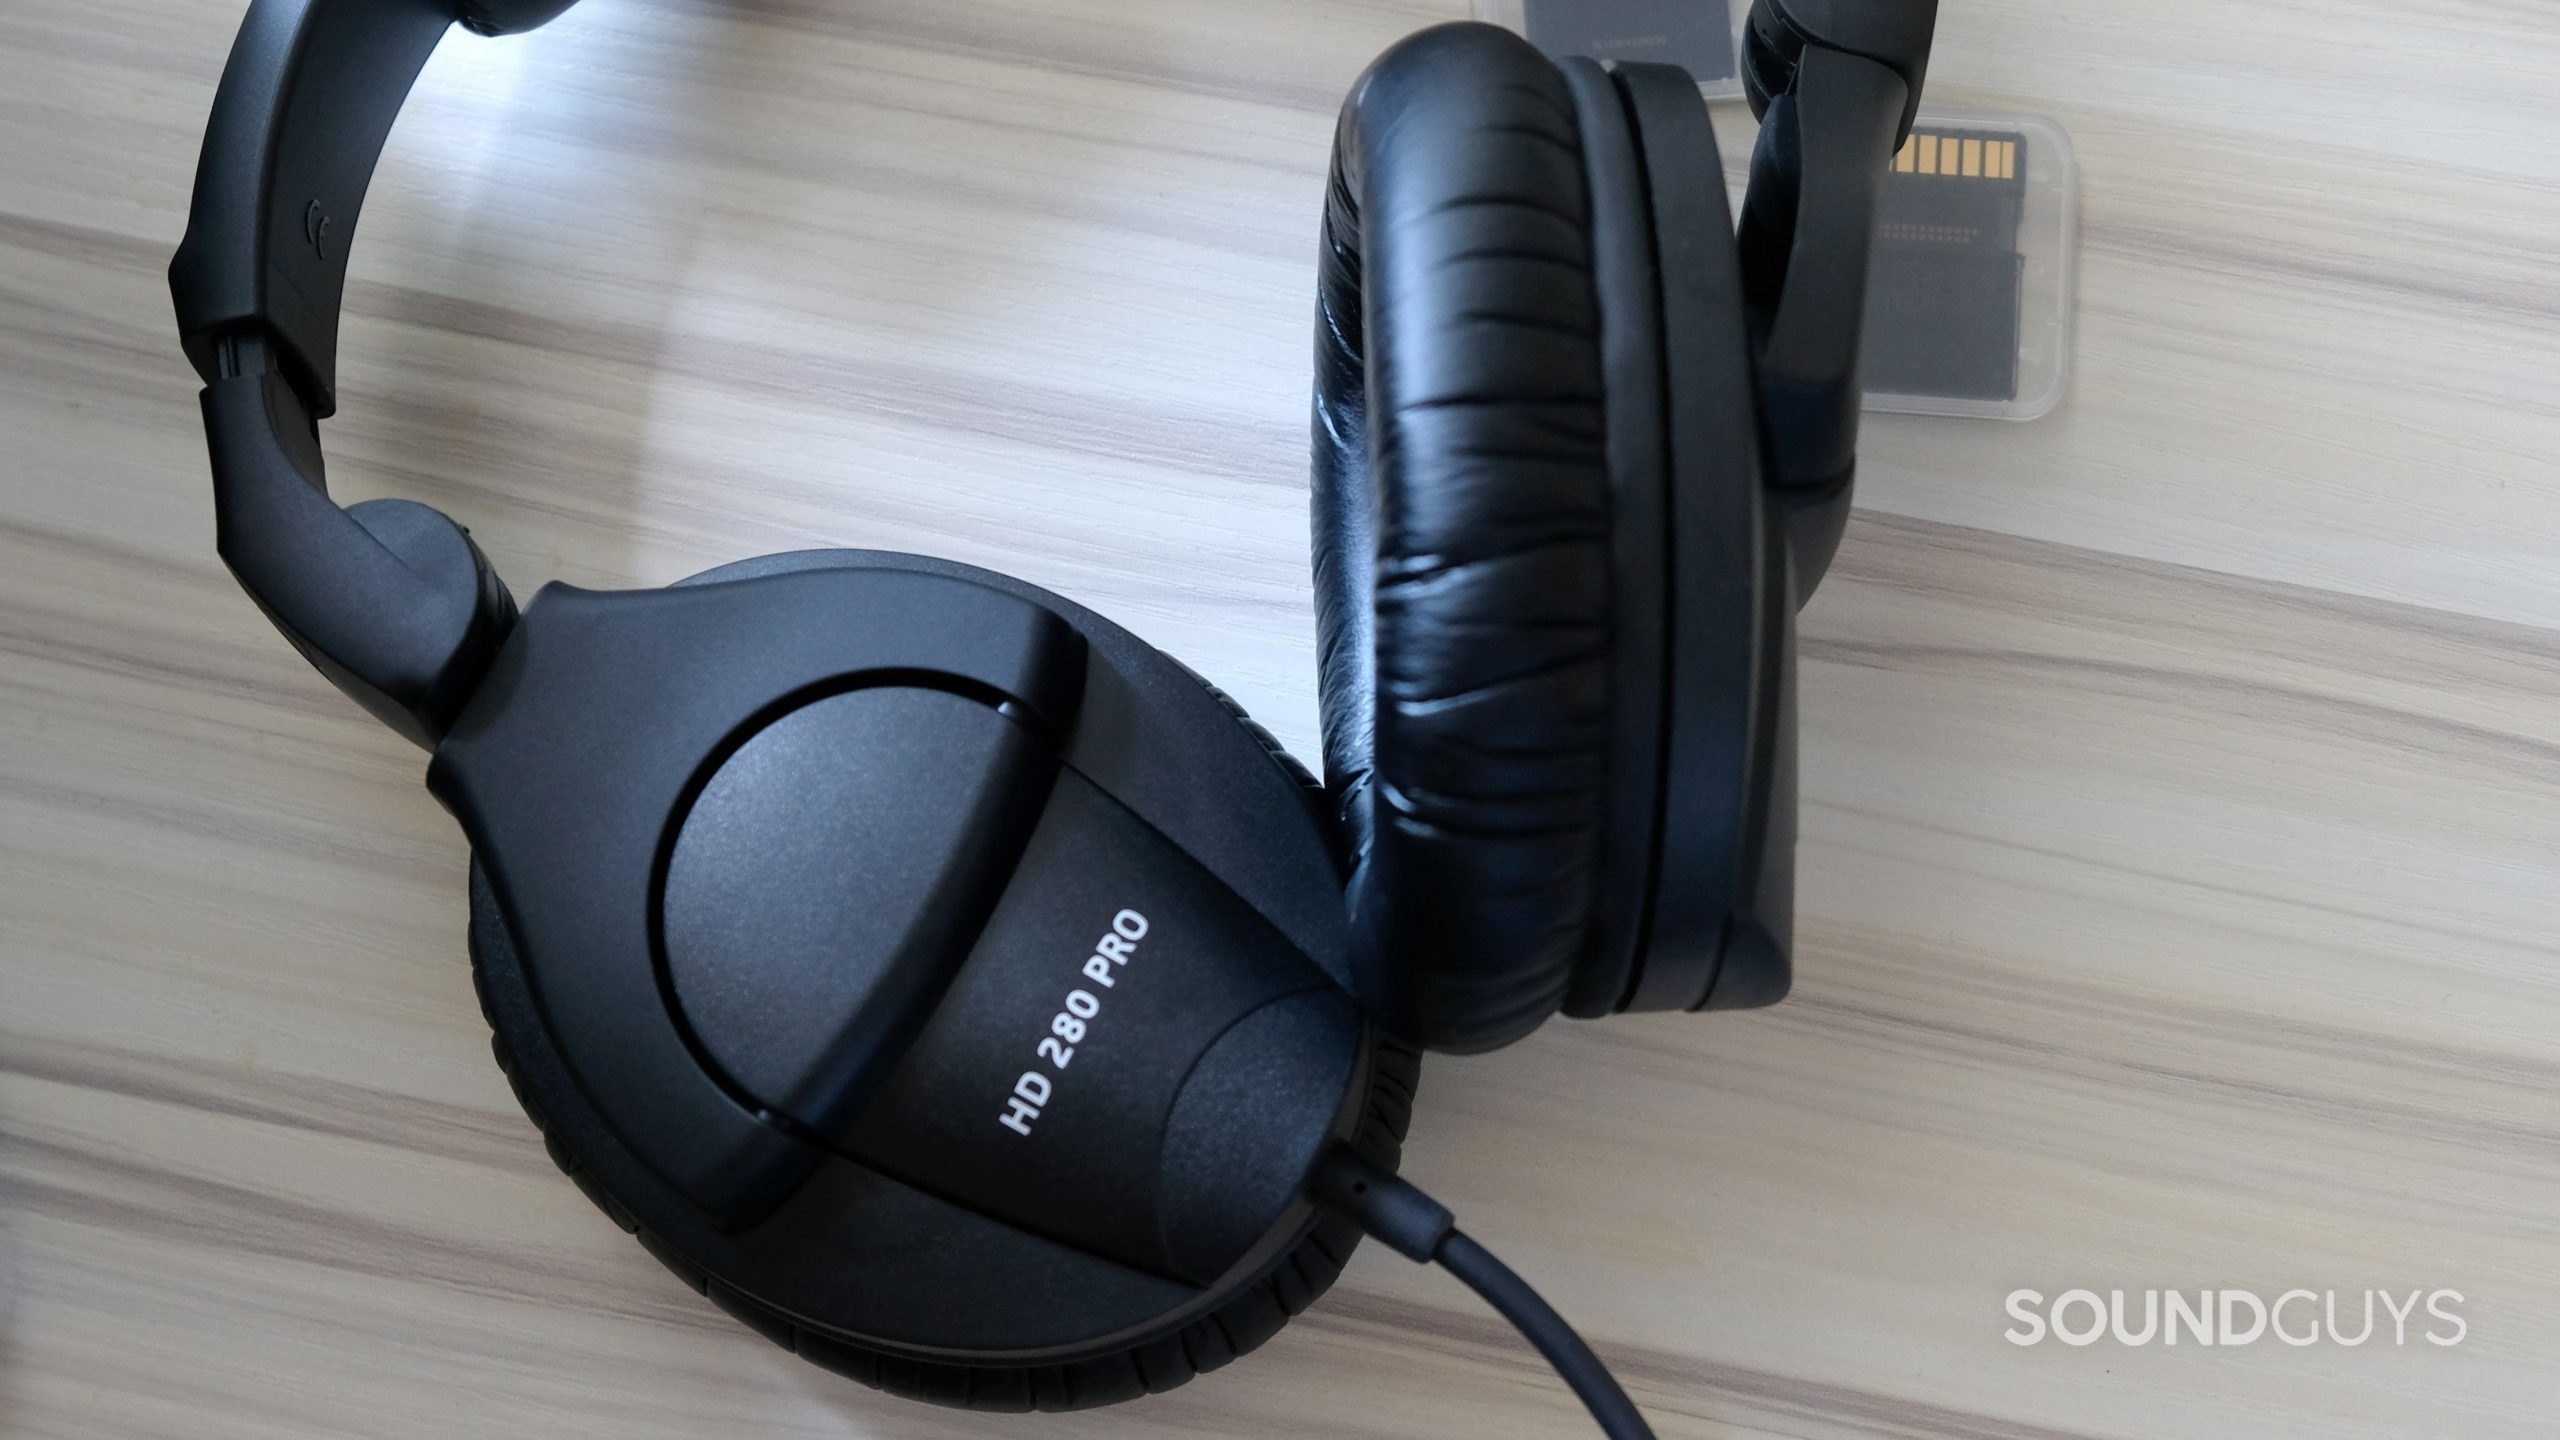 The Sennheiser HD 280 Pro studio headphones with the ear cups rotated in different directions.